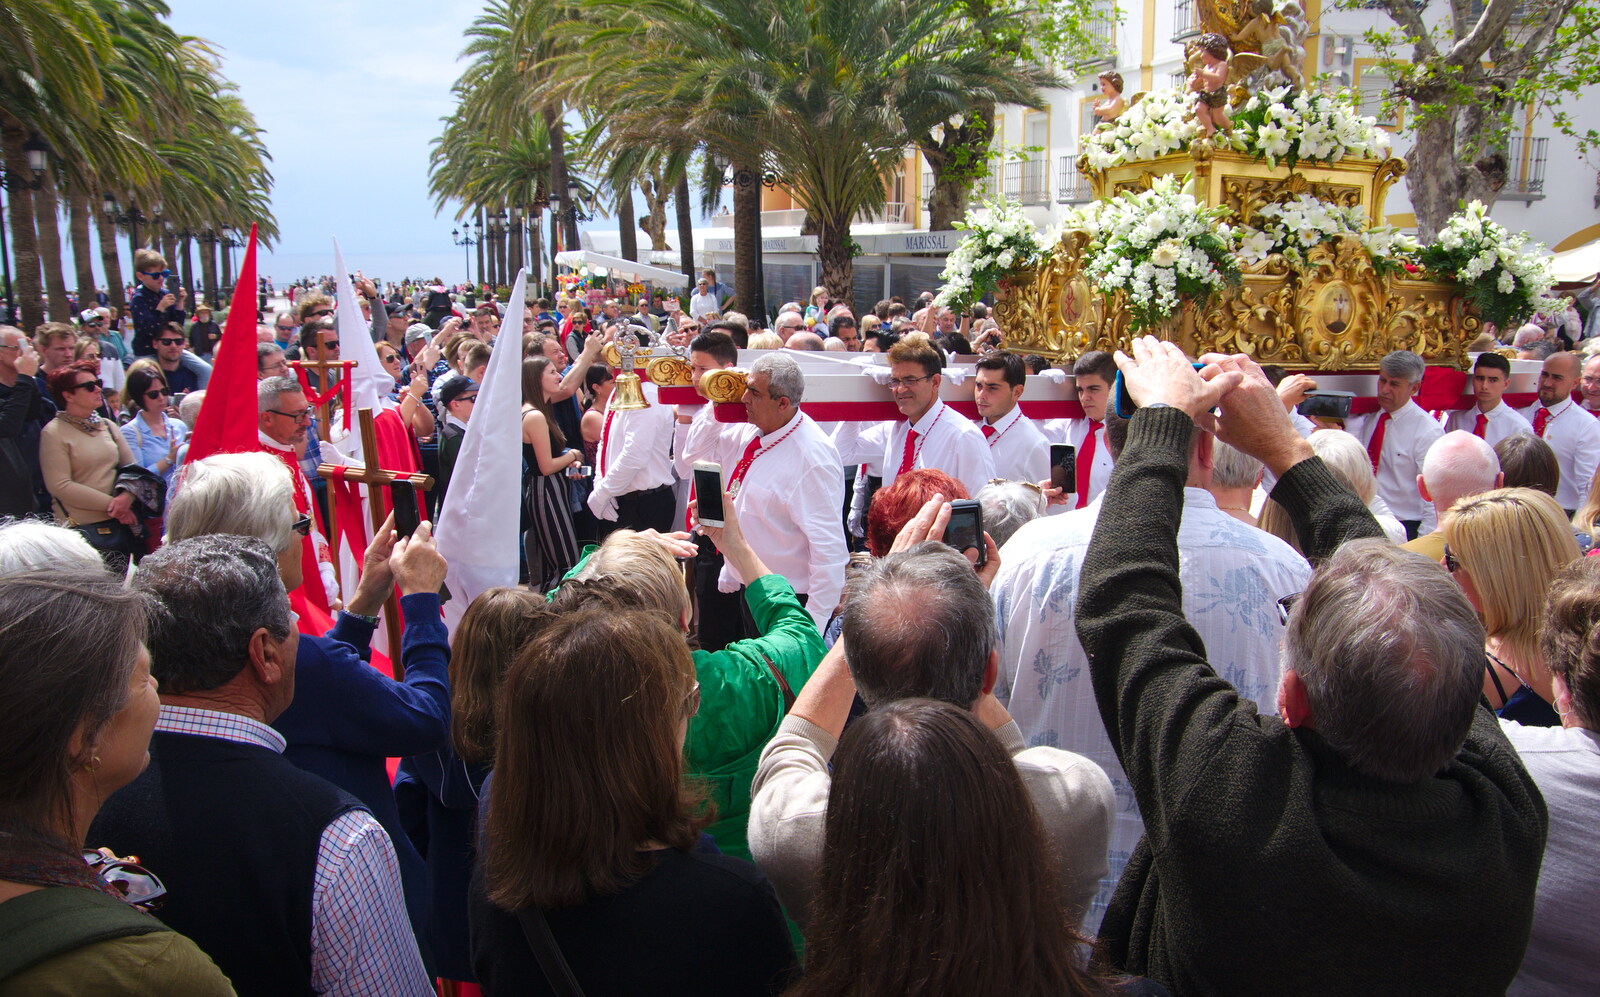 Capirotes and statues head past the Balcón from An Easter Parade, Nerja, Andalusia, Spain - 21st April 2019